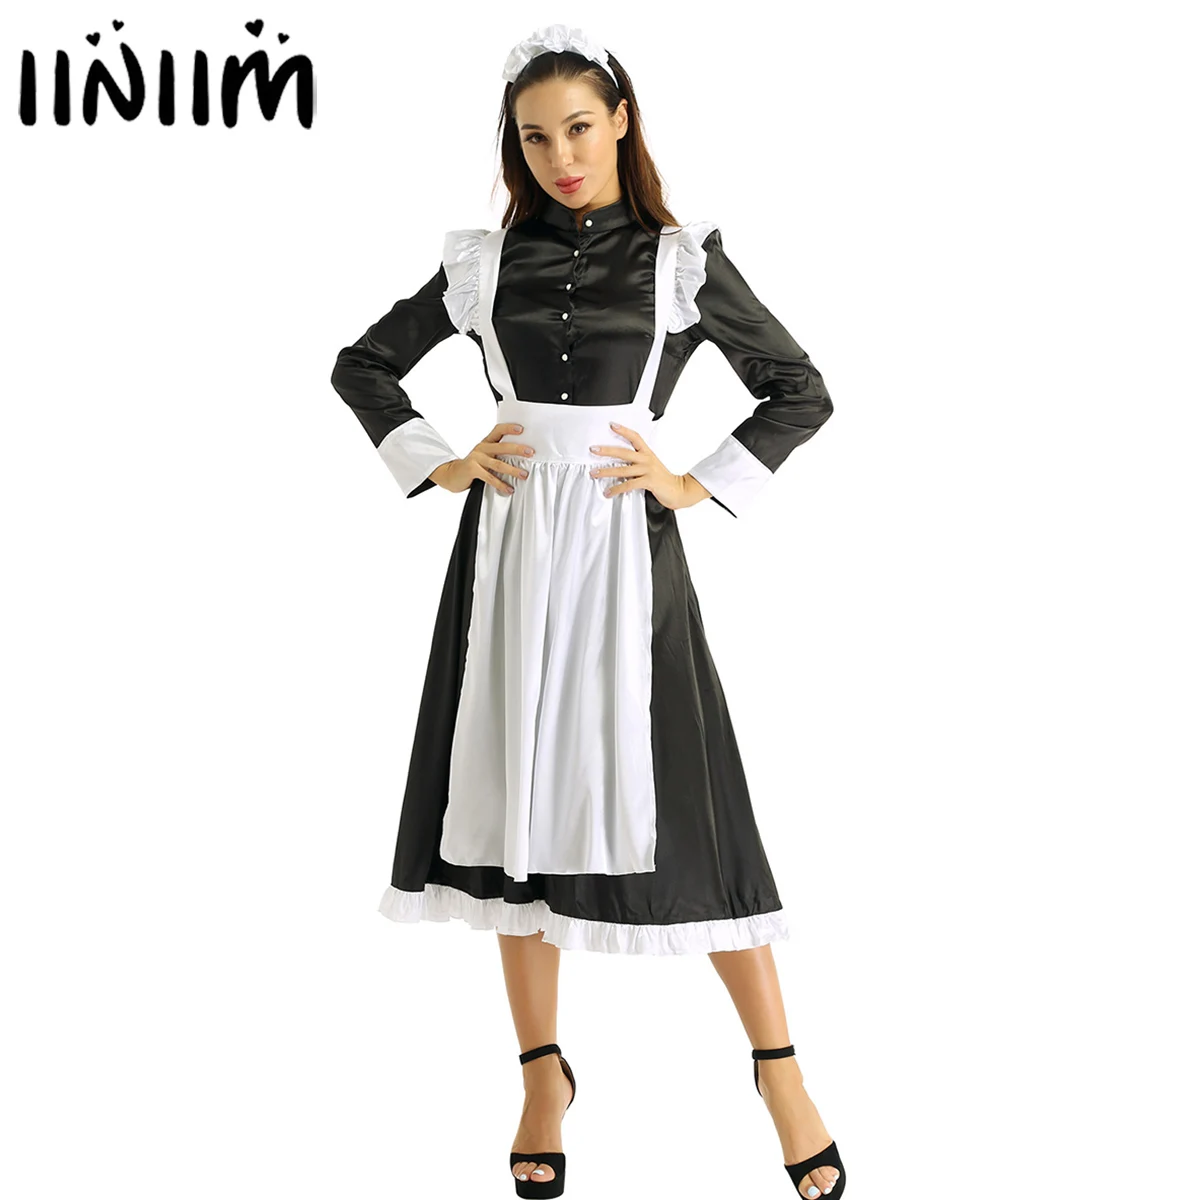 

iiniim Women Adult Maid Cosplay Costume Outfit Clubwear Female Front Button Down Long Maxi Fancy Dress with Apron and Headpiece